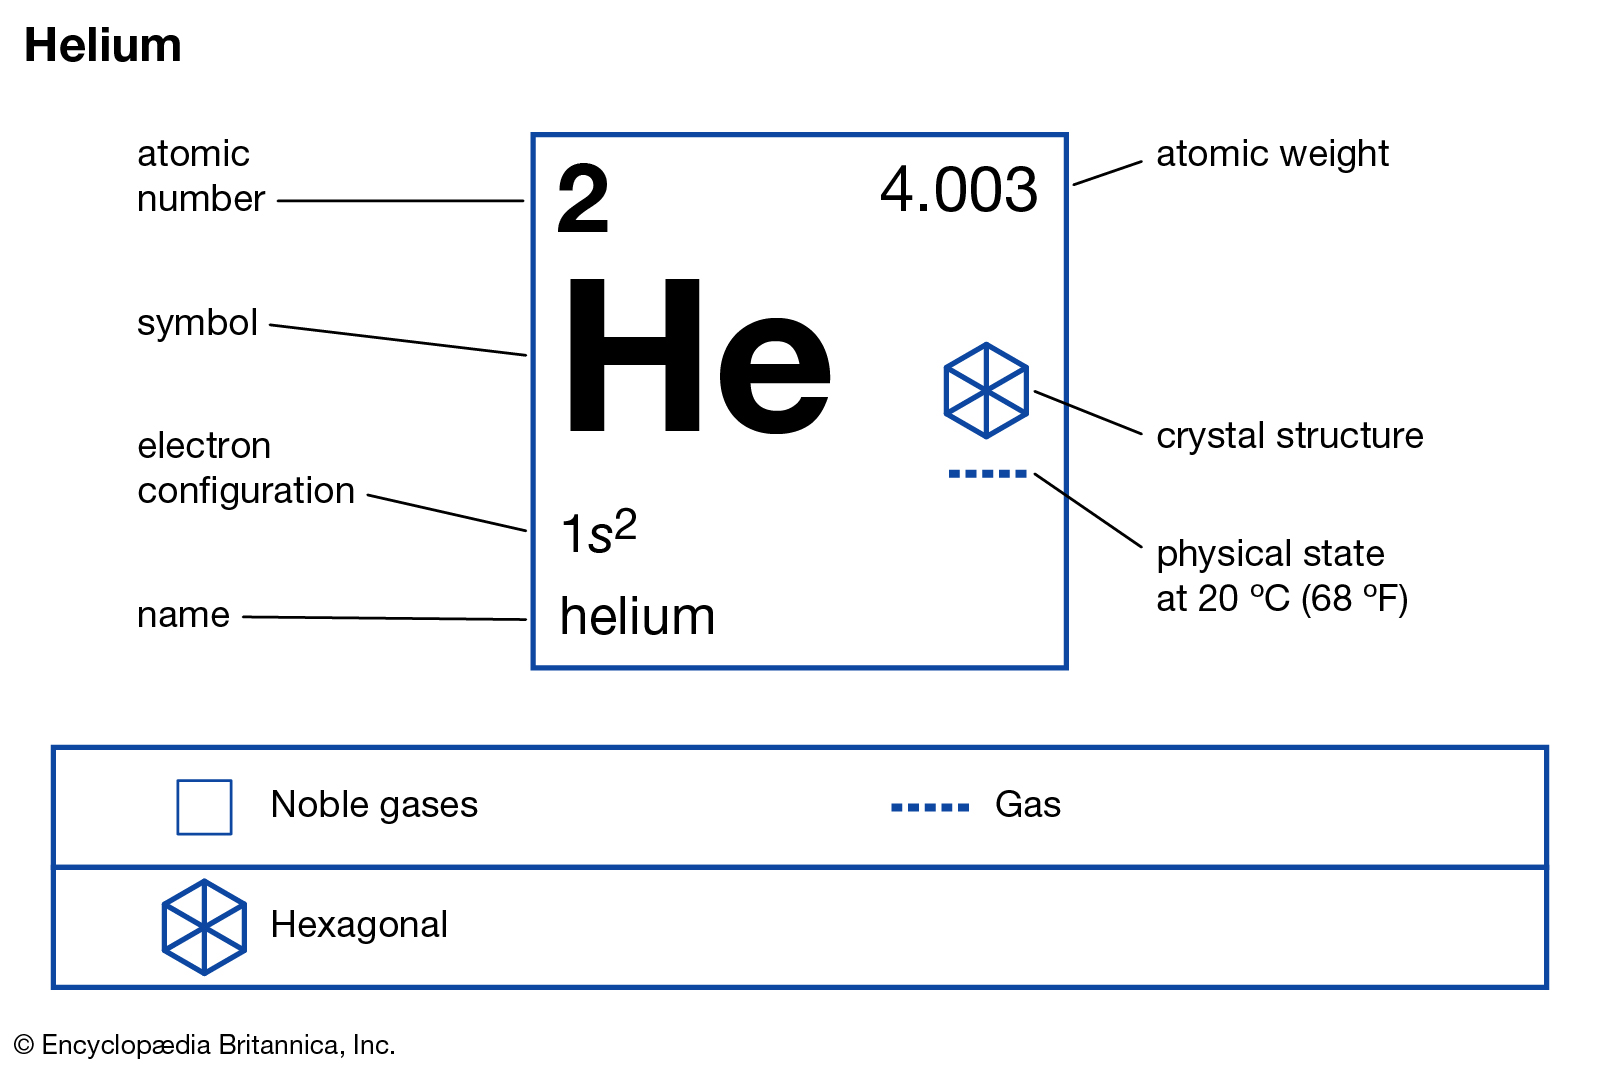 hinh-anh-interesting-facts-about-helium-33-0